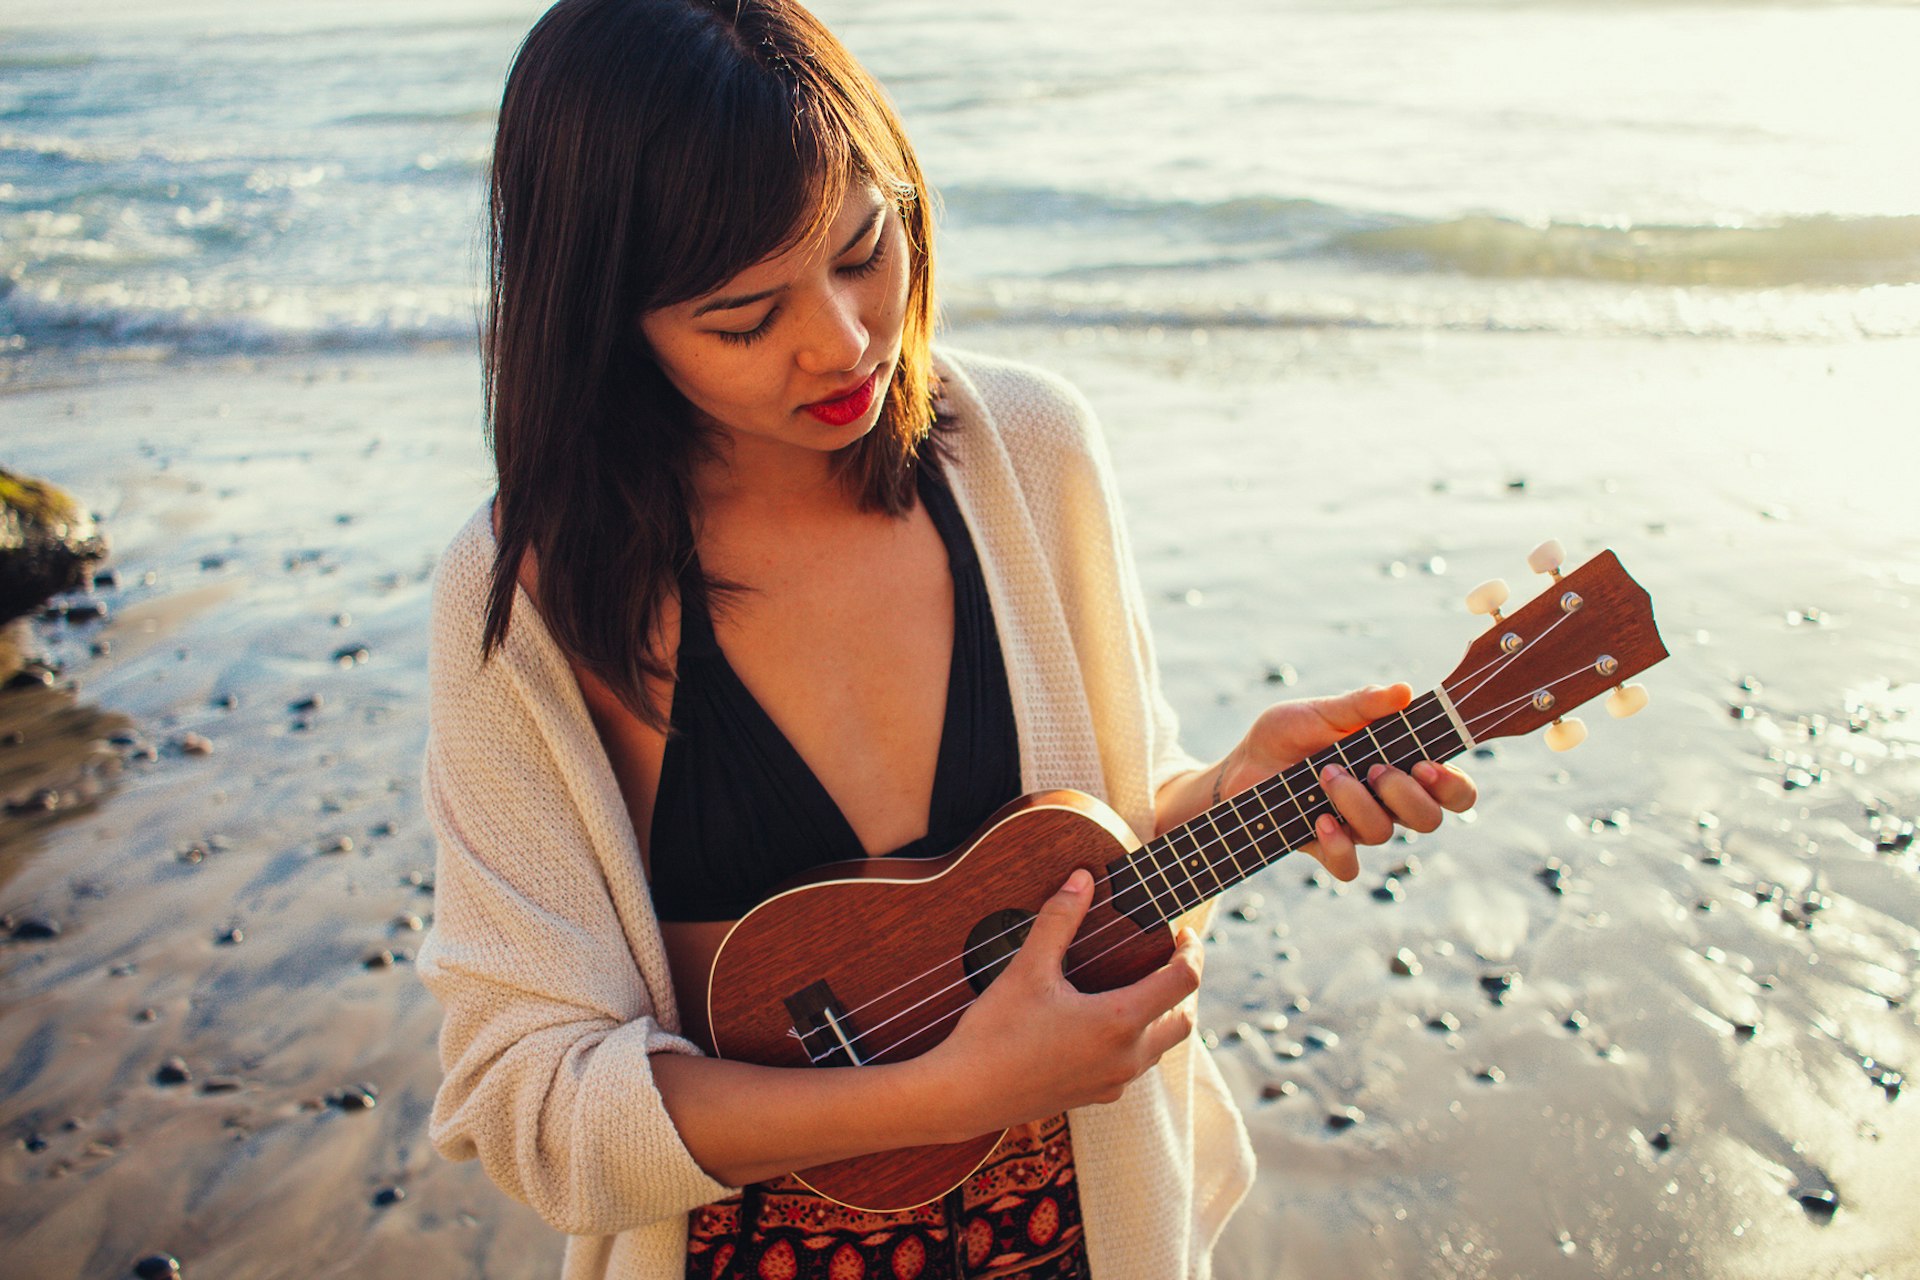 A woman plays the ukulele on the beach in Hawaii